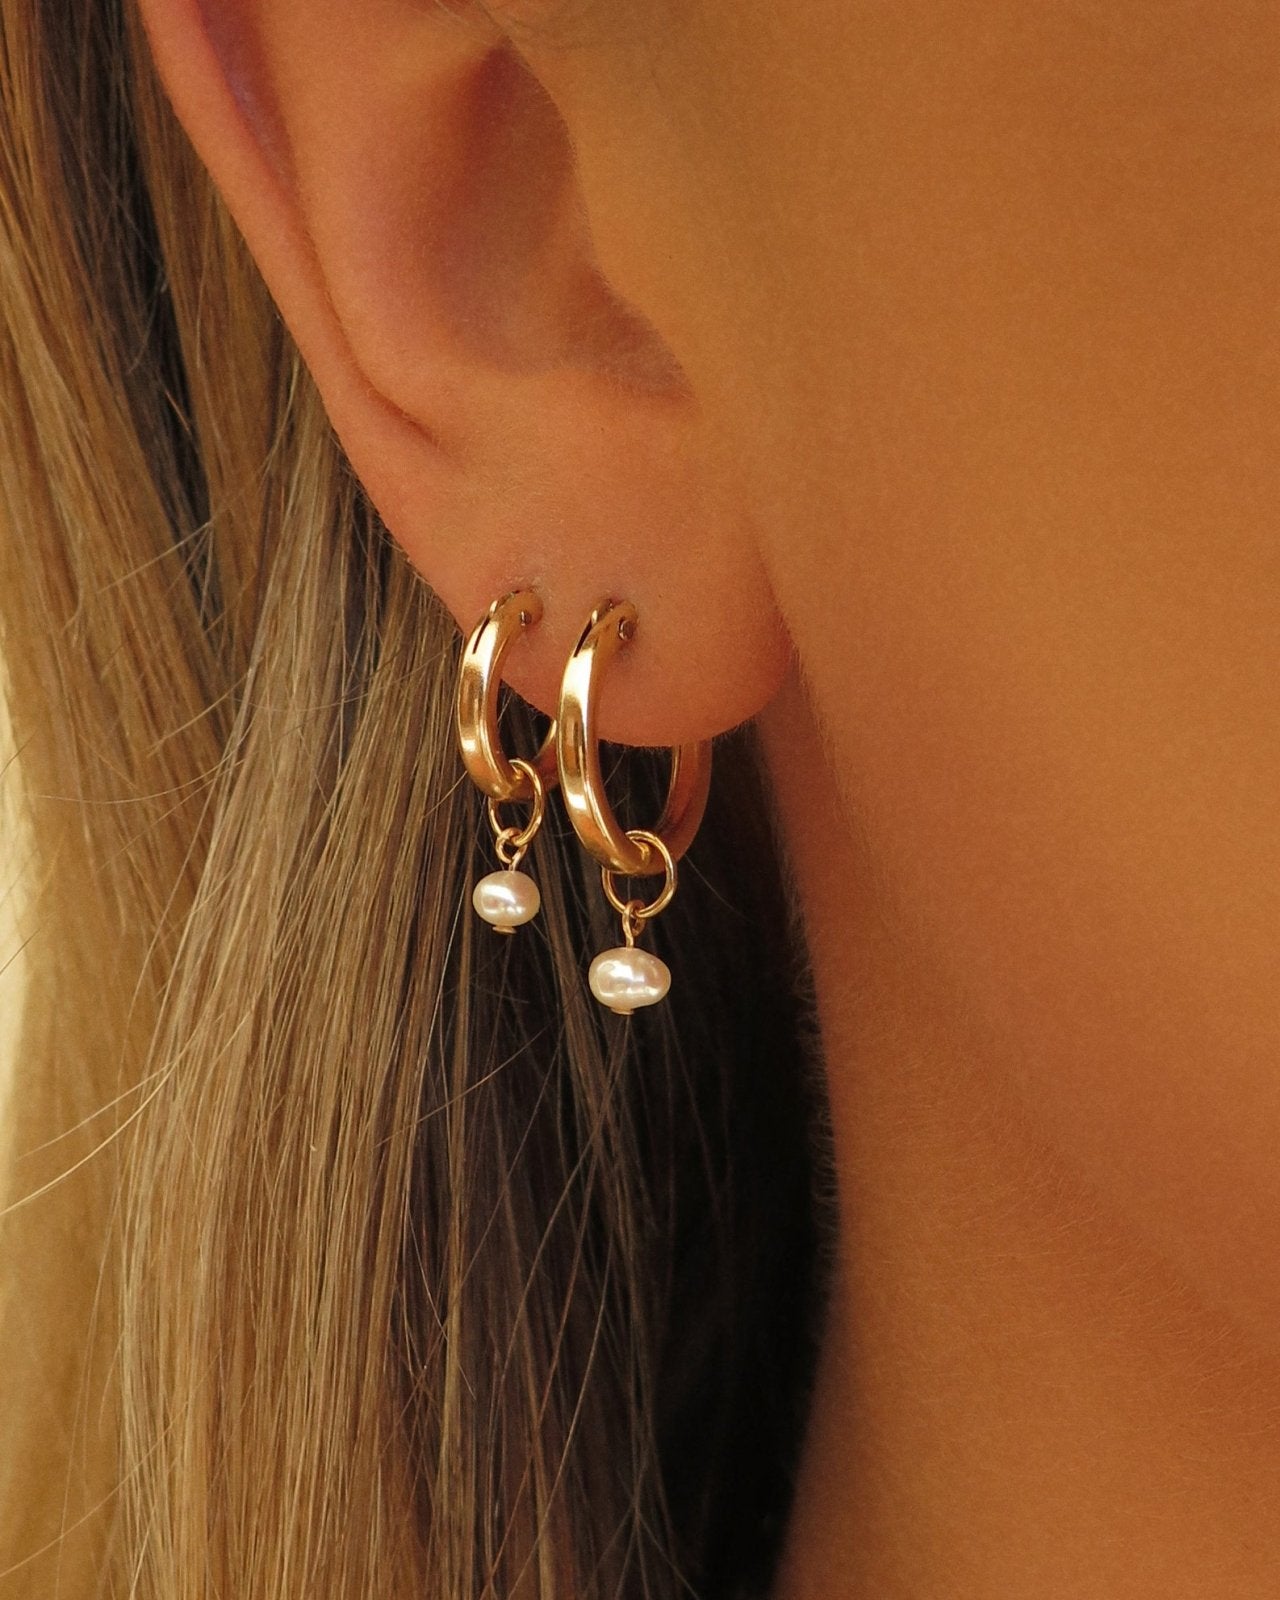 THICK FRESHWATER PEARL HOOP EARRINGS- 14k Yellow Gold - The Littl - 14k Yellow Gold Fill - 12mm